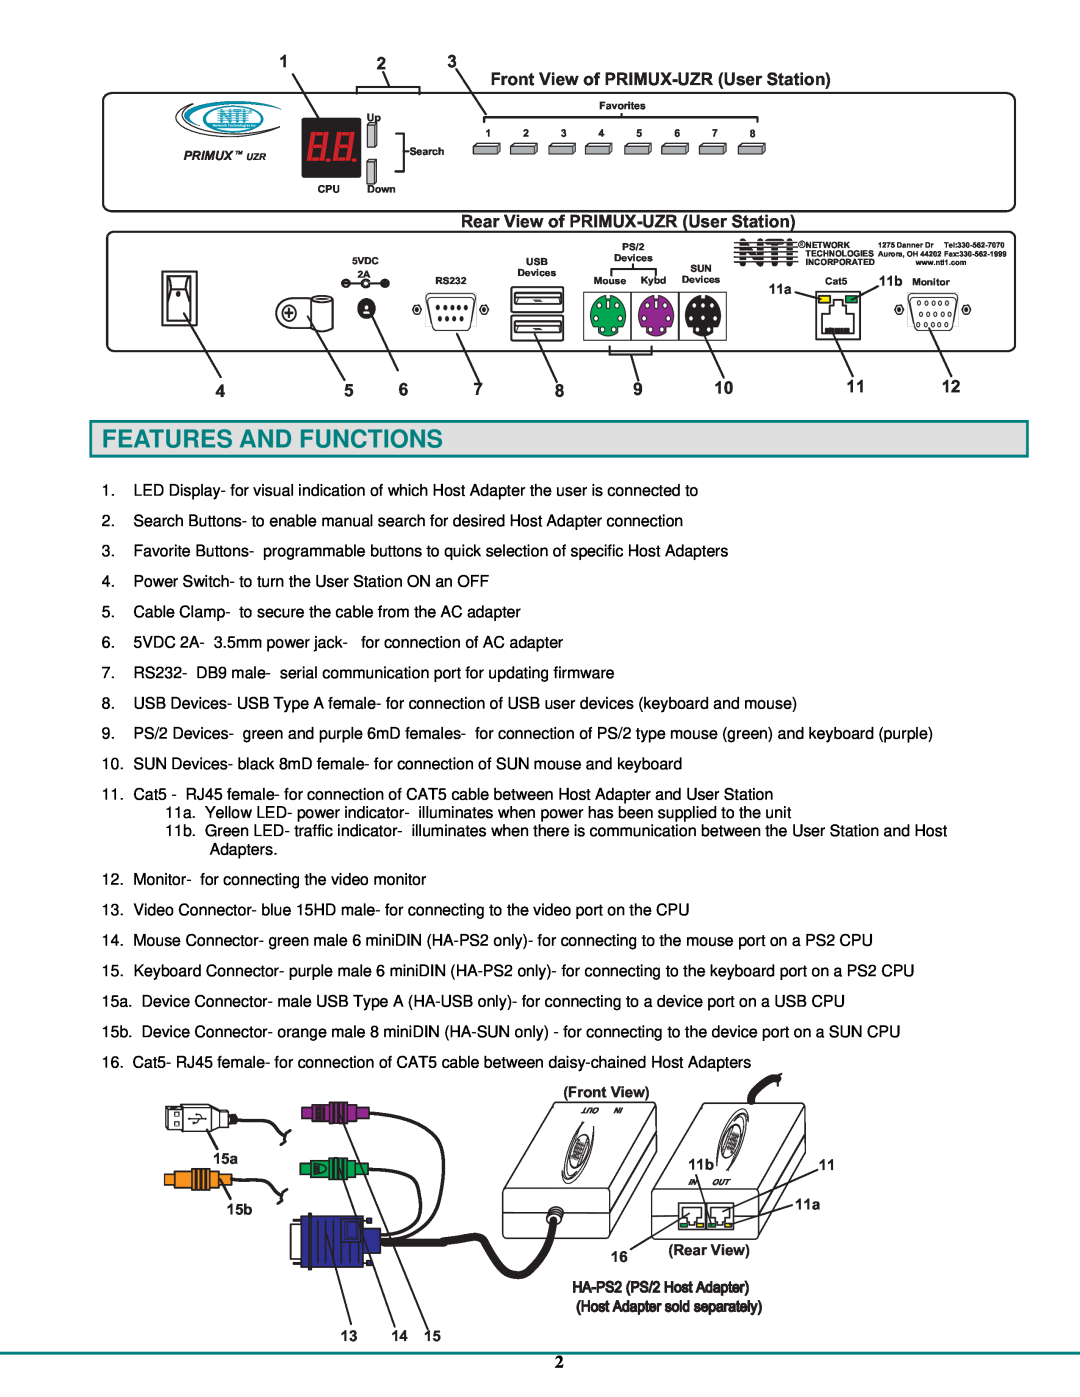 Network Technologies CAT5 Features And Functions, FrontViewofPRIMUX-UZRUserStation, RearViewofPRIMUX-UZRUserStation 